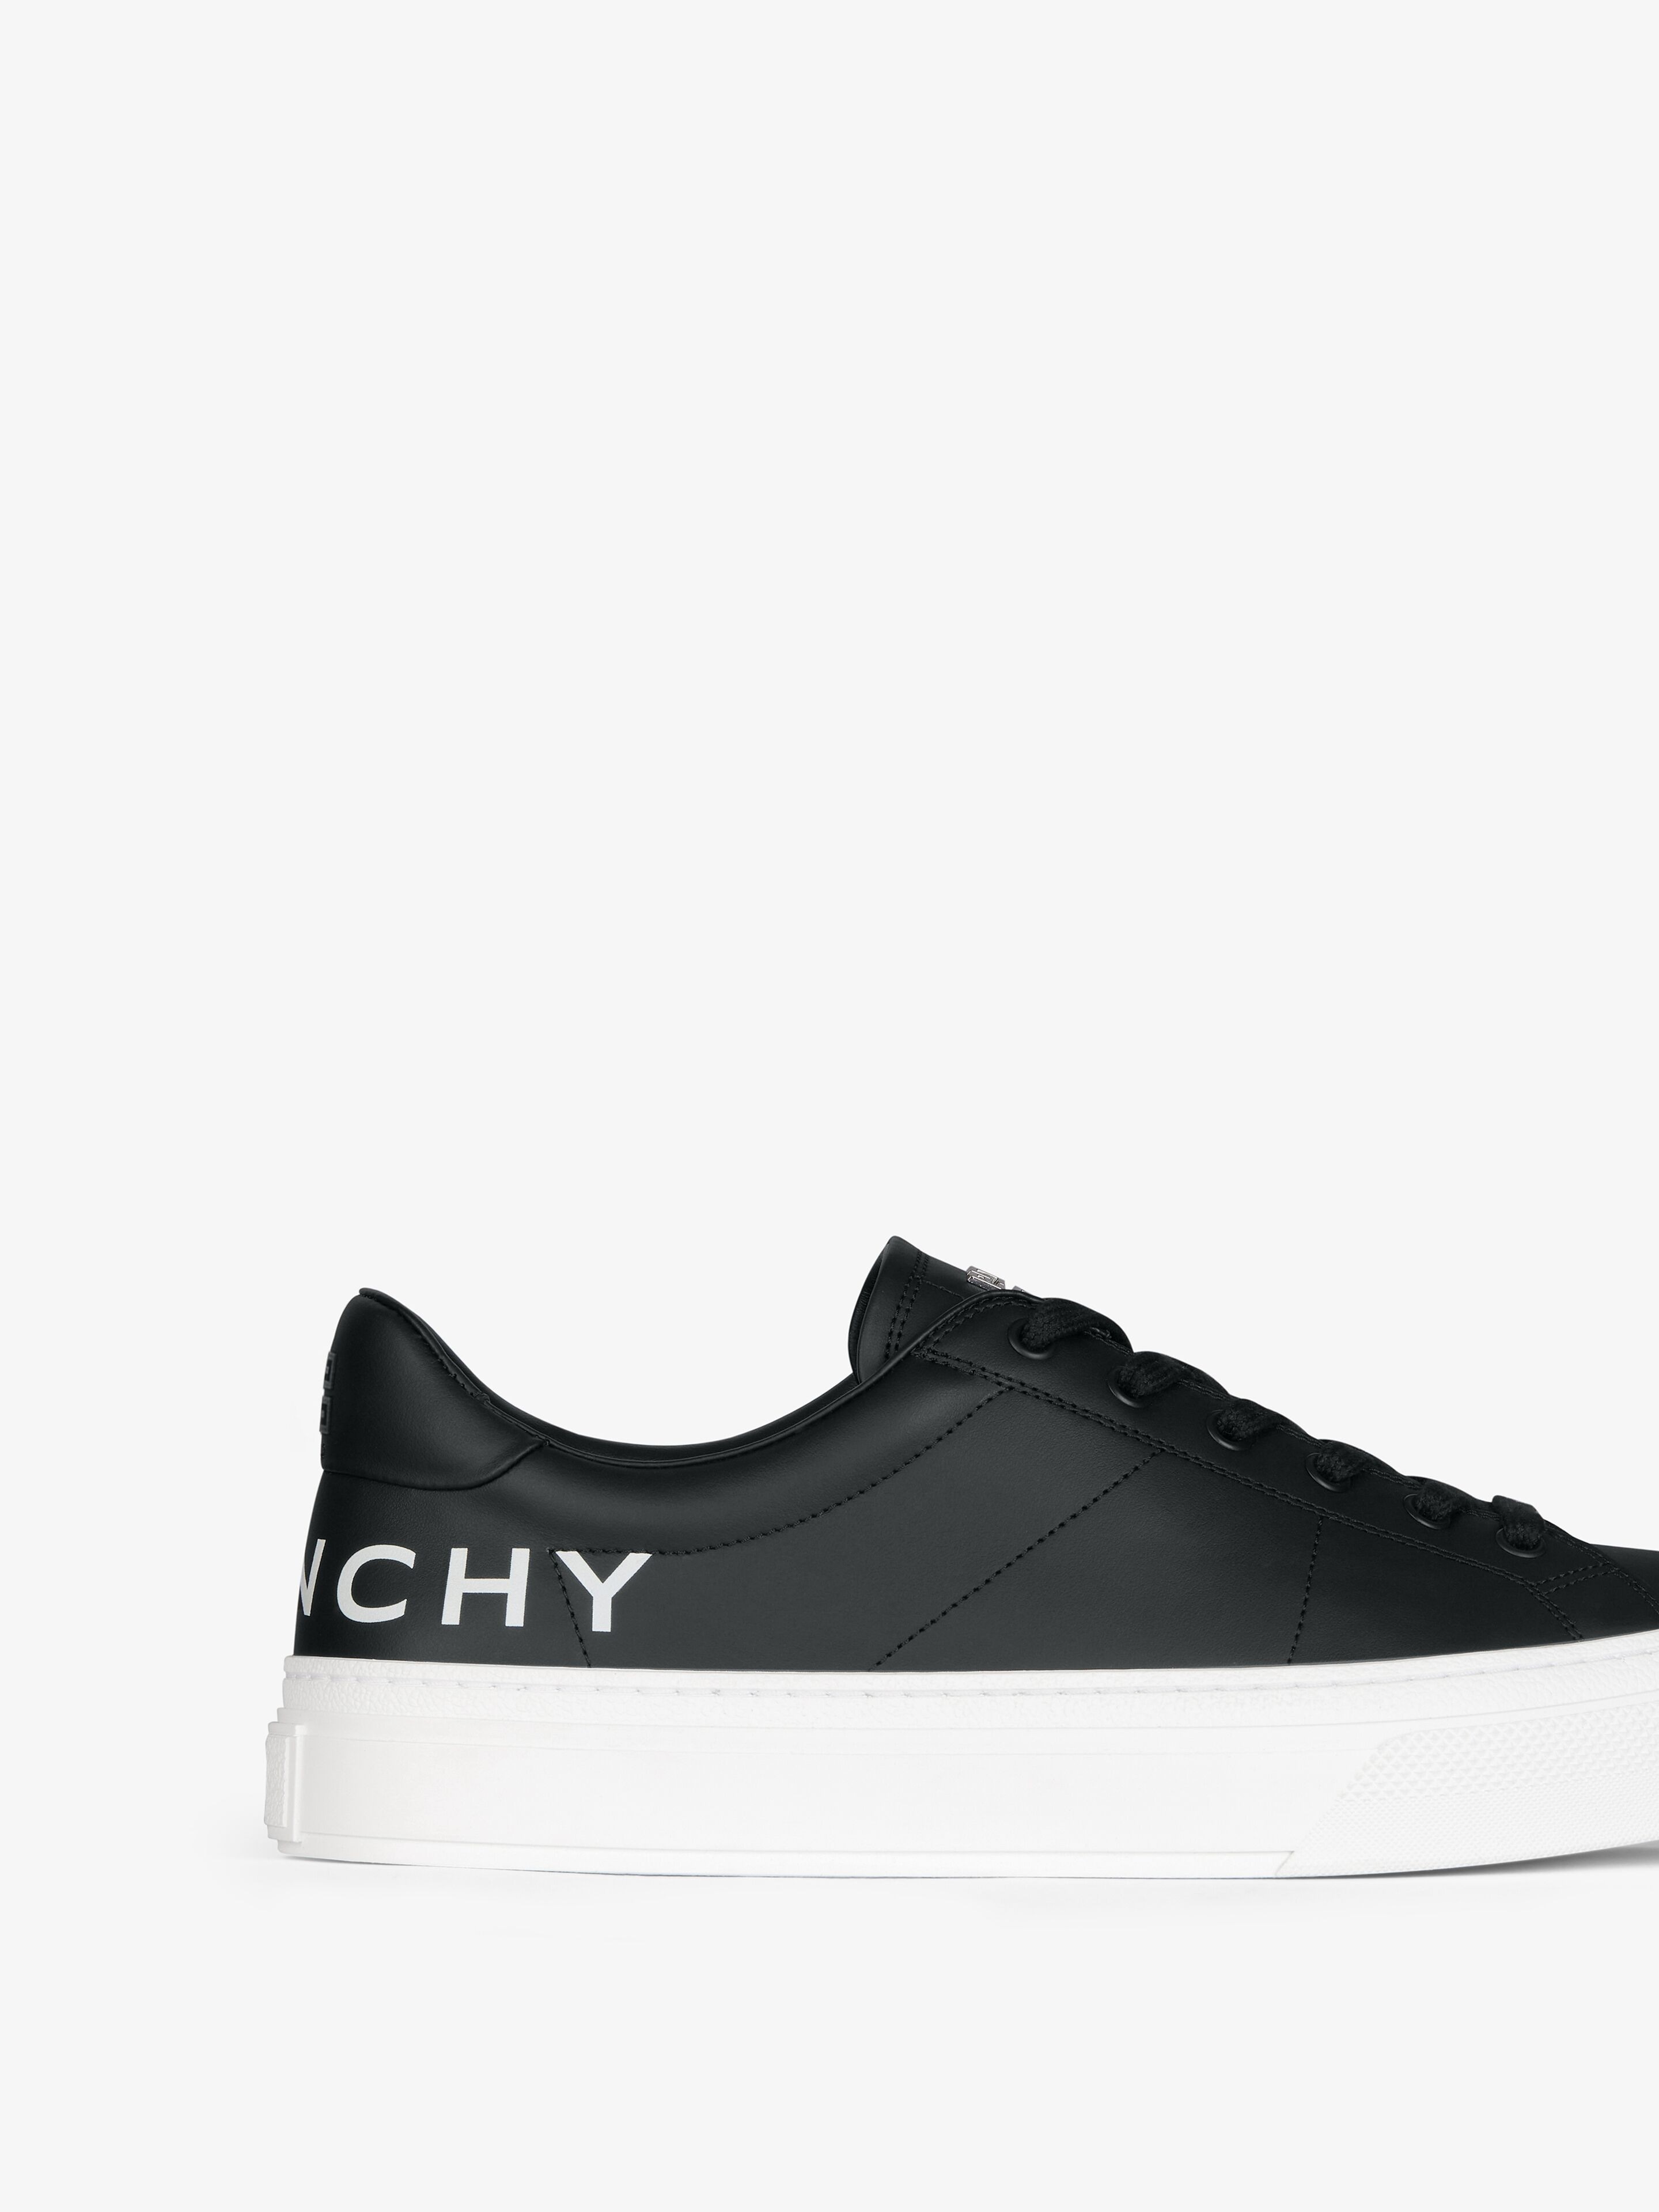 CITY SPORT SNEAKERS IN LEATHER WITH PRINTED GIVENCHY LOGO - 6